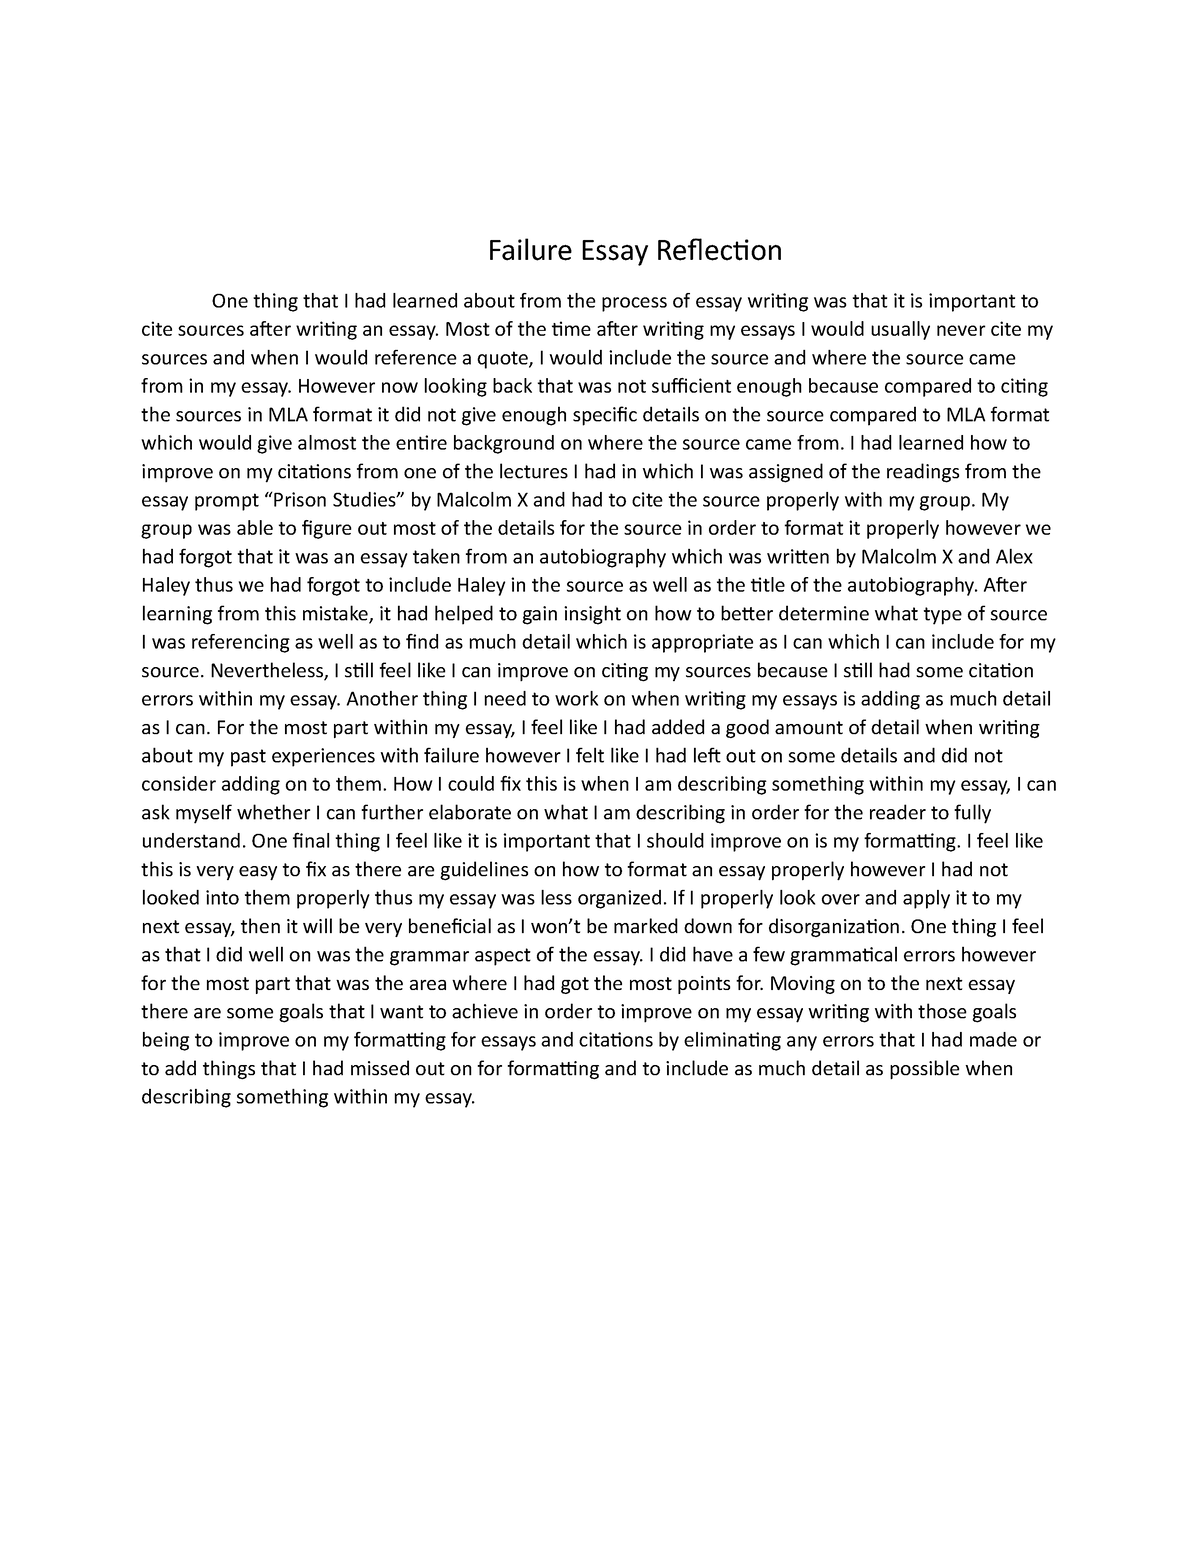 what is failure in life essay